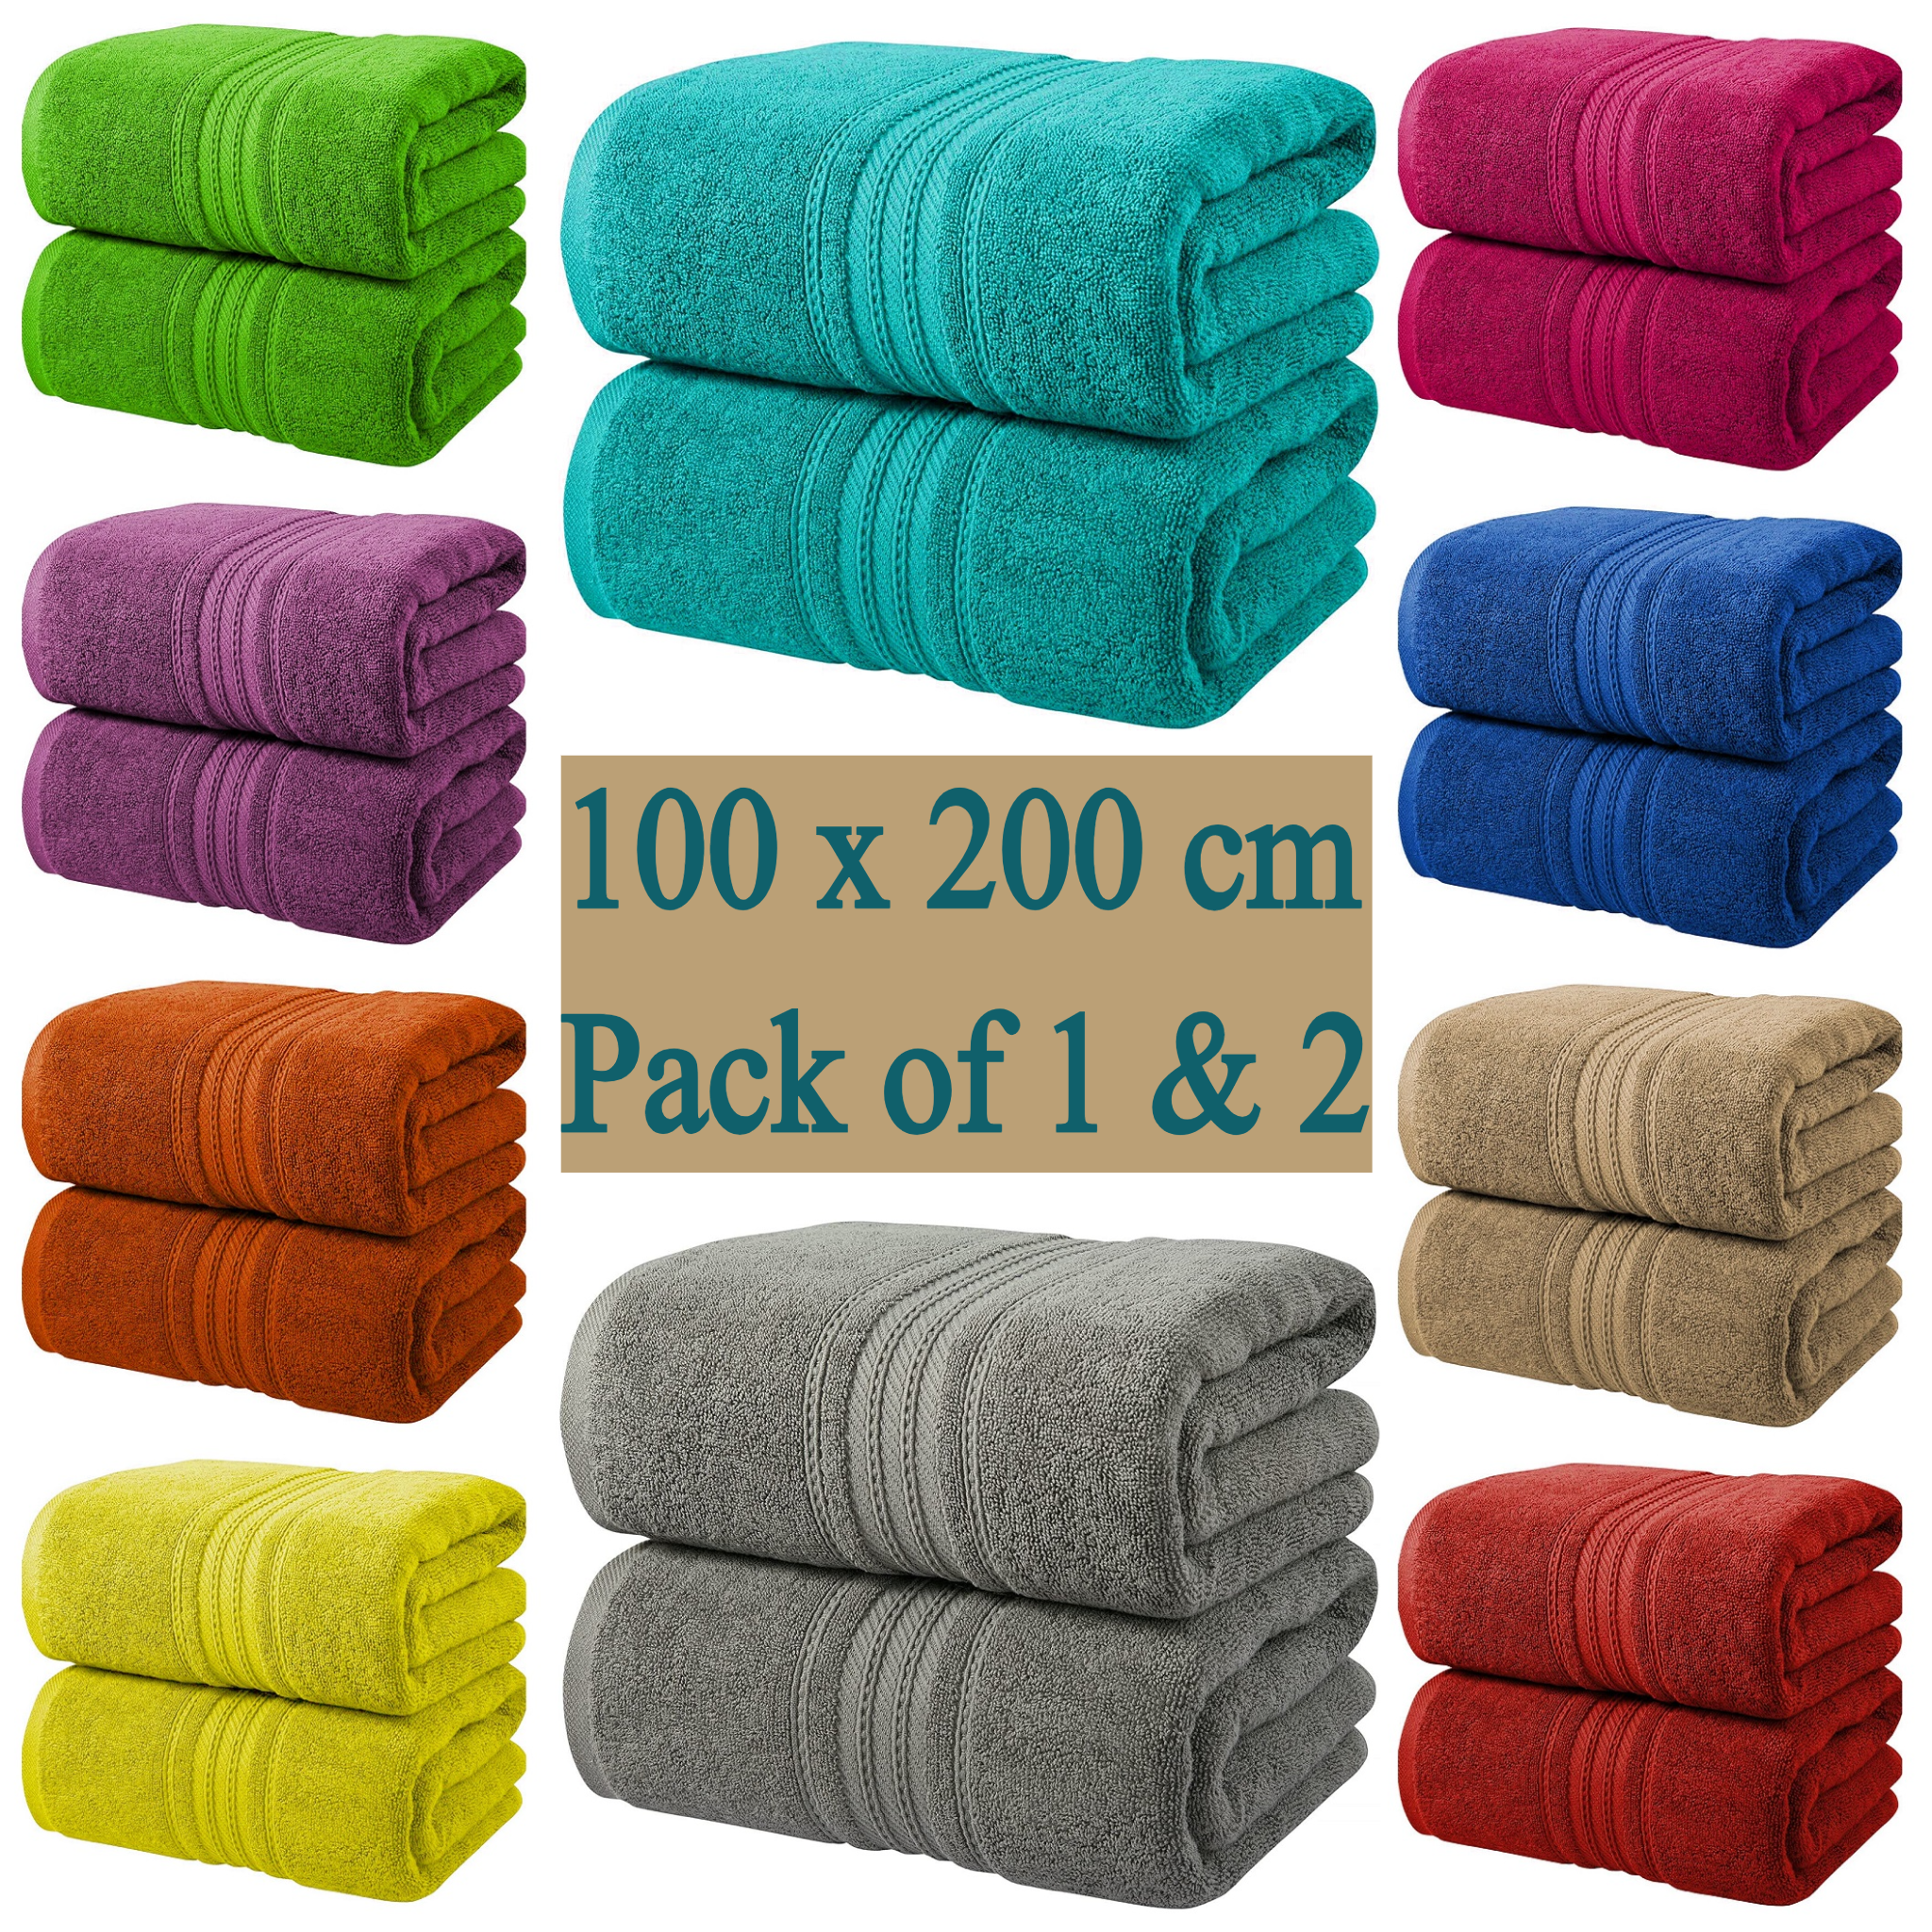 Cheap Price Pack of 2 Super 600 GSM Luxury Soft Extra Large Bath Sheet